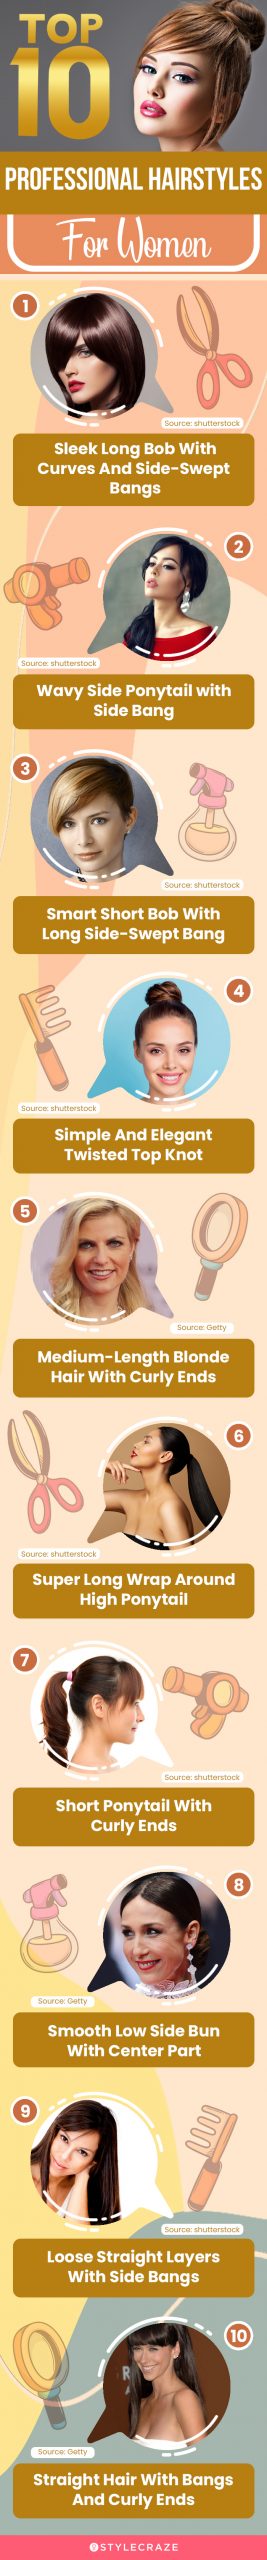 top 10 professional hairstyles for women (infographic)